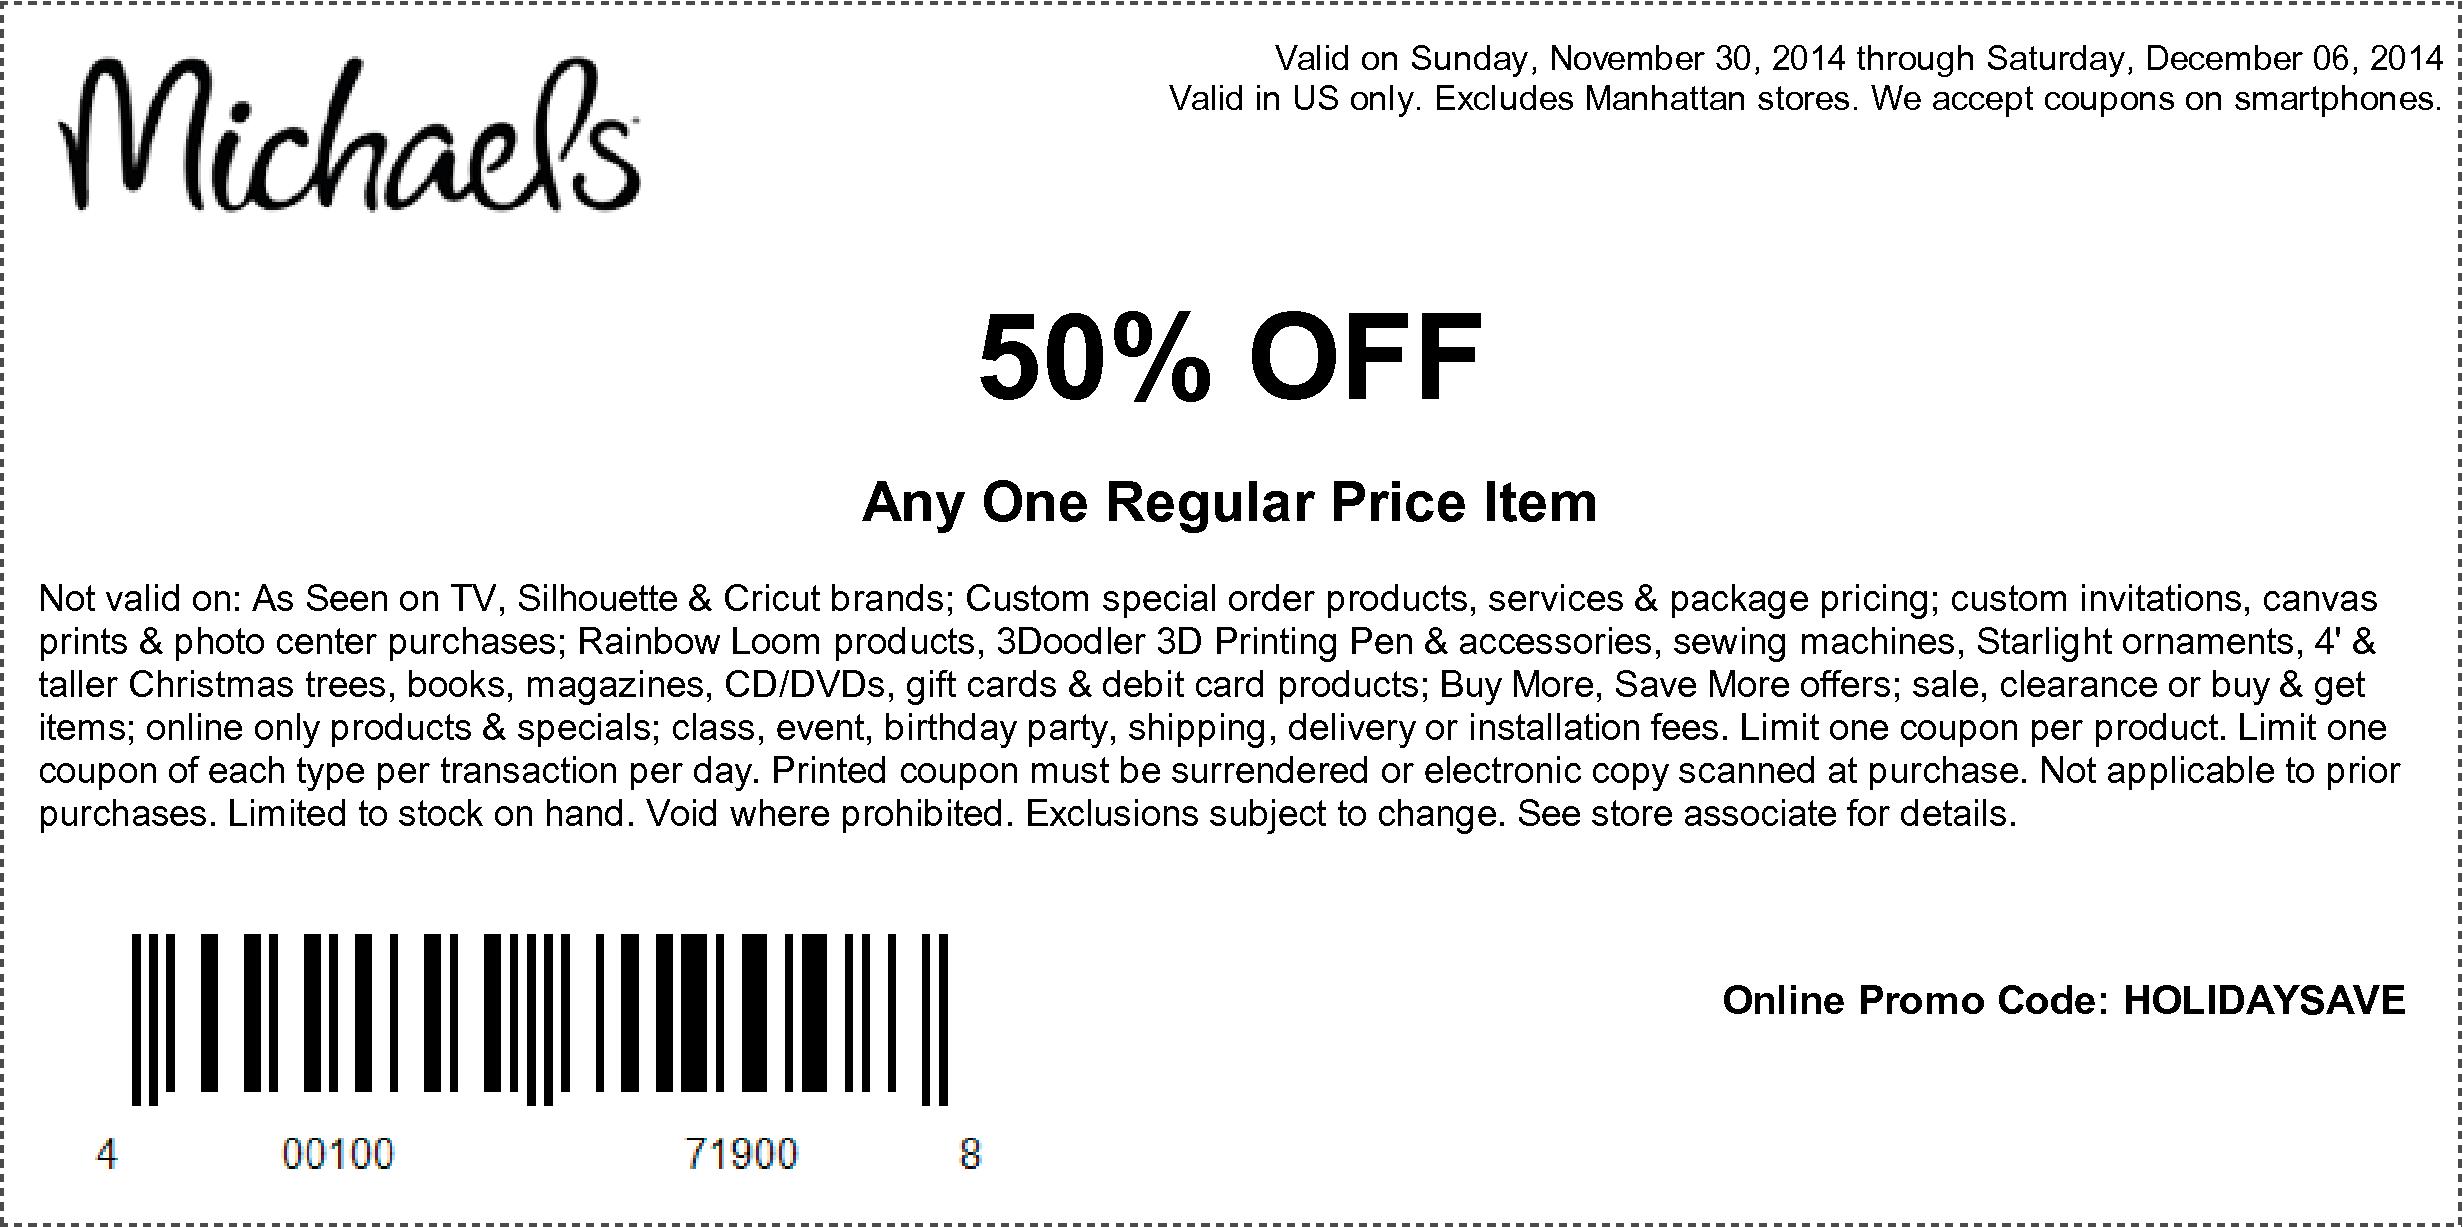 Michael's 50% off 1 regular item (Printable coupon) Ends July 14